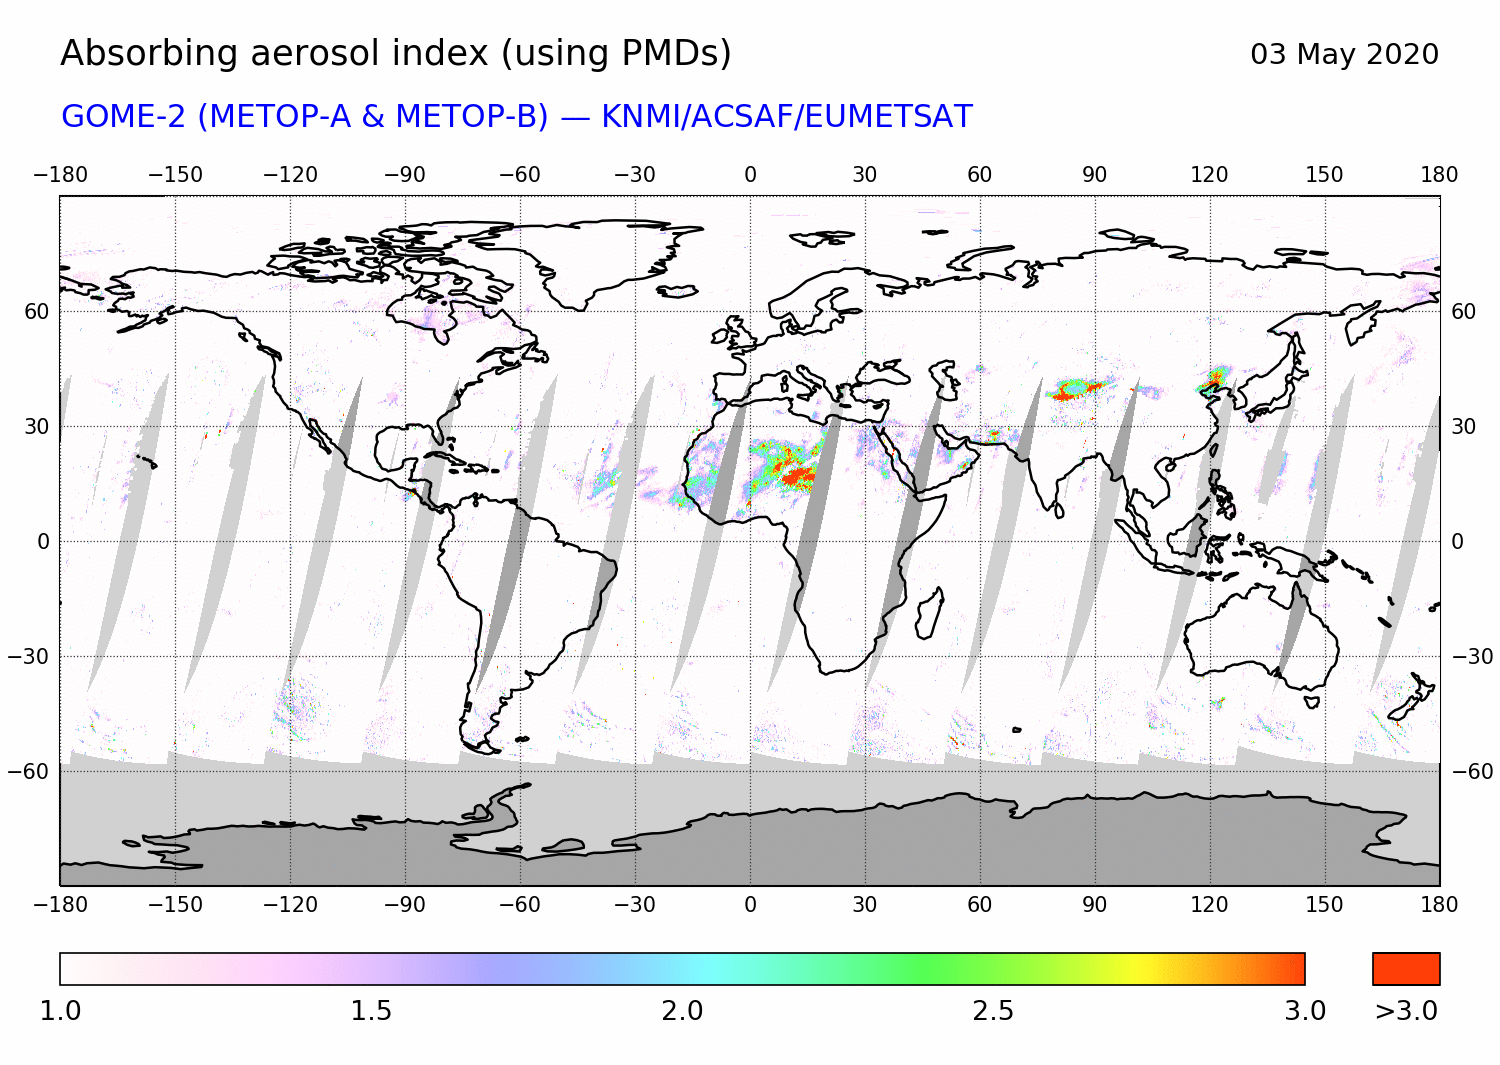 GOME-2 - Absorbing aerosol index of 03 May 2020